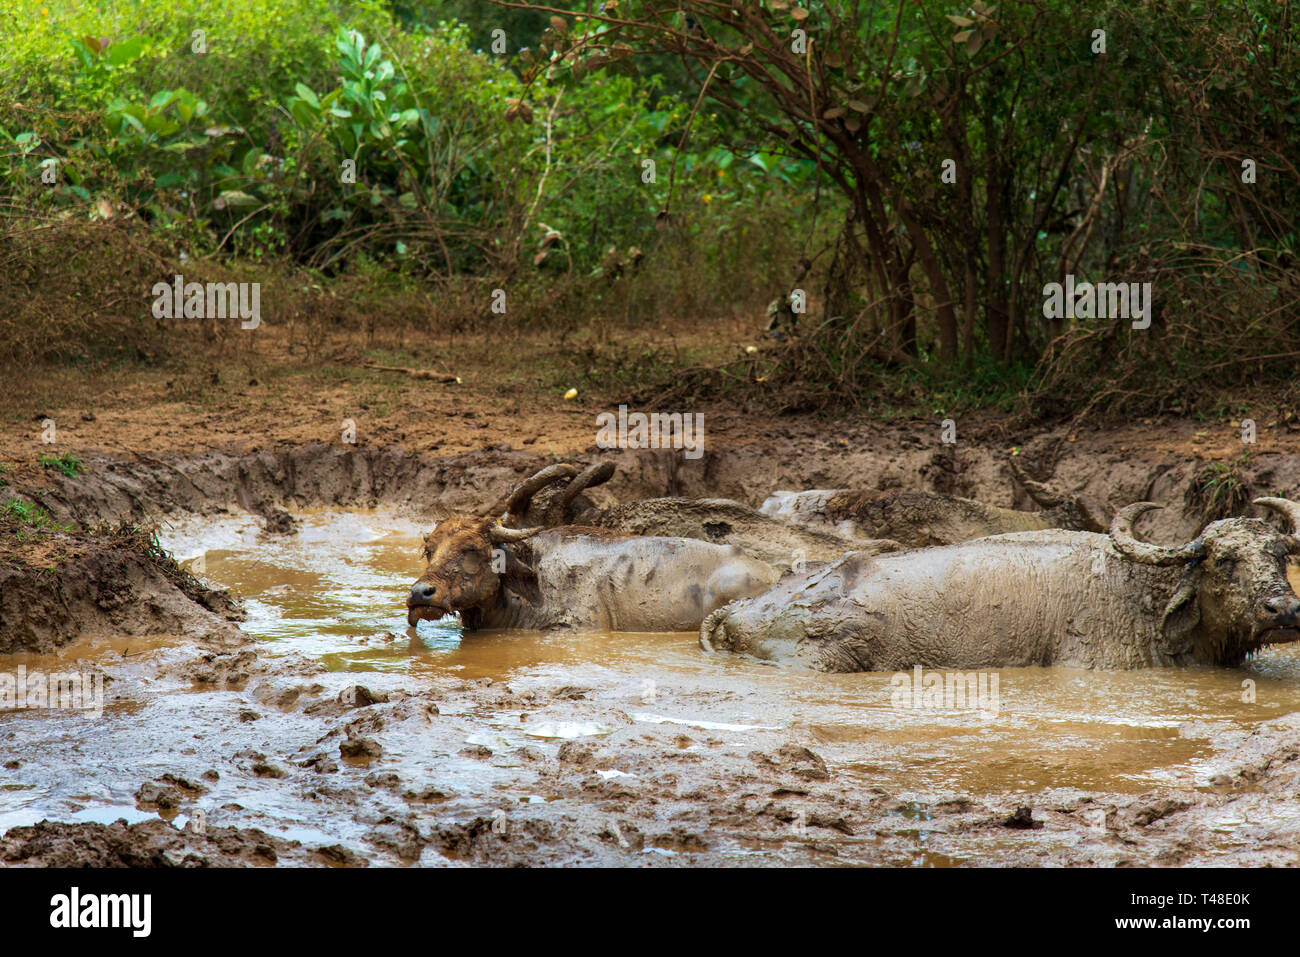 Buffalo cooling down in a mud pond Stock Photo